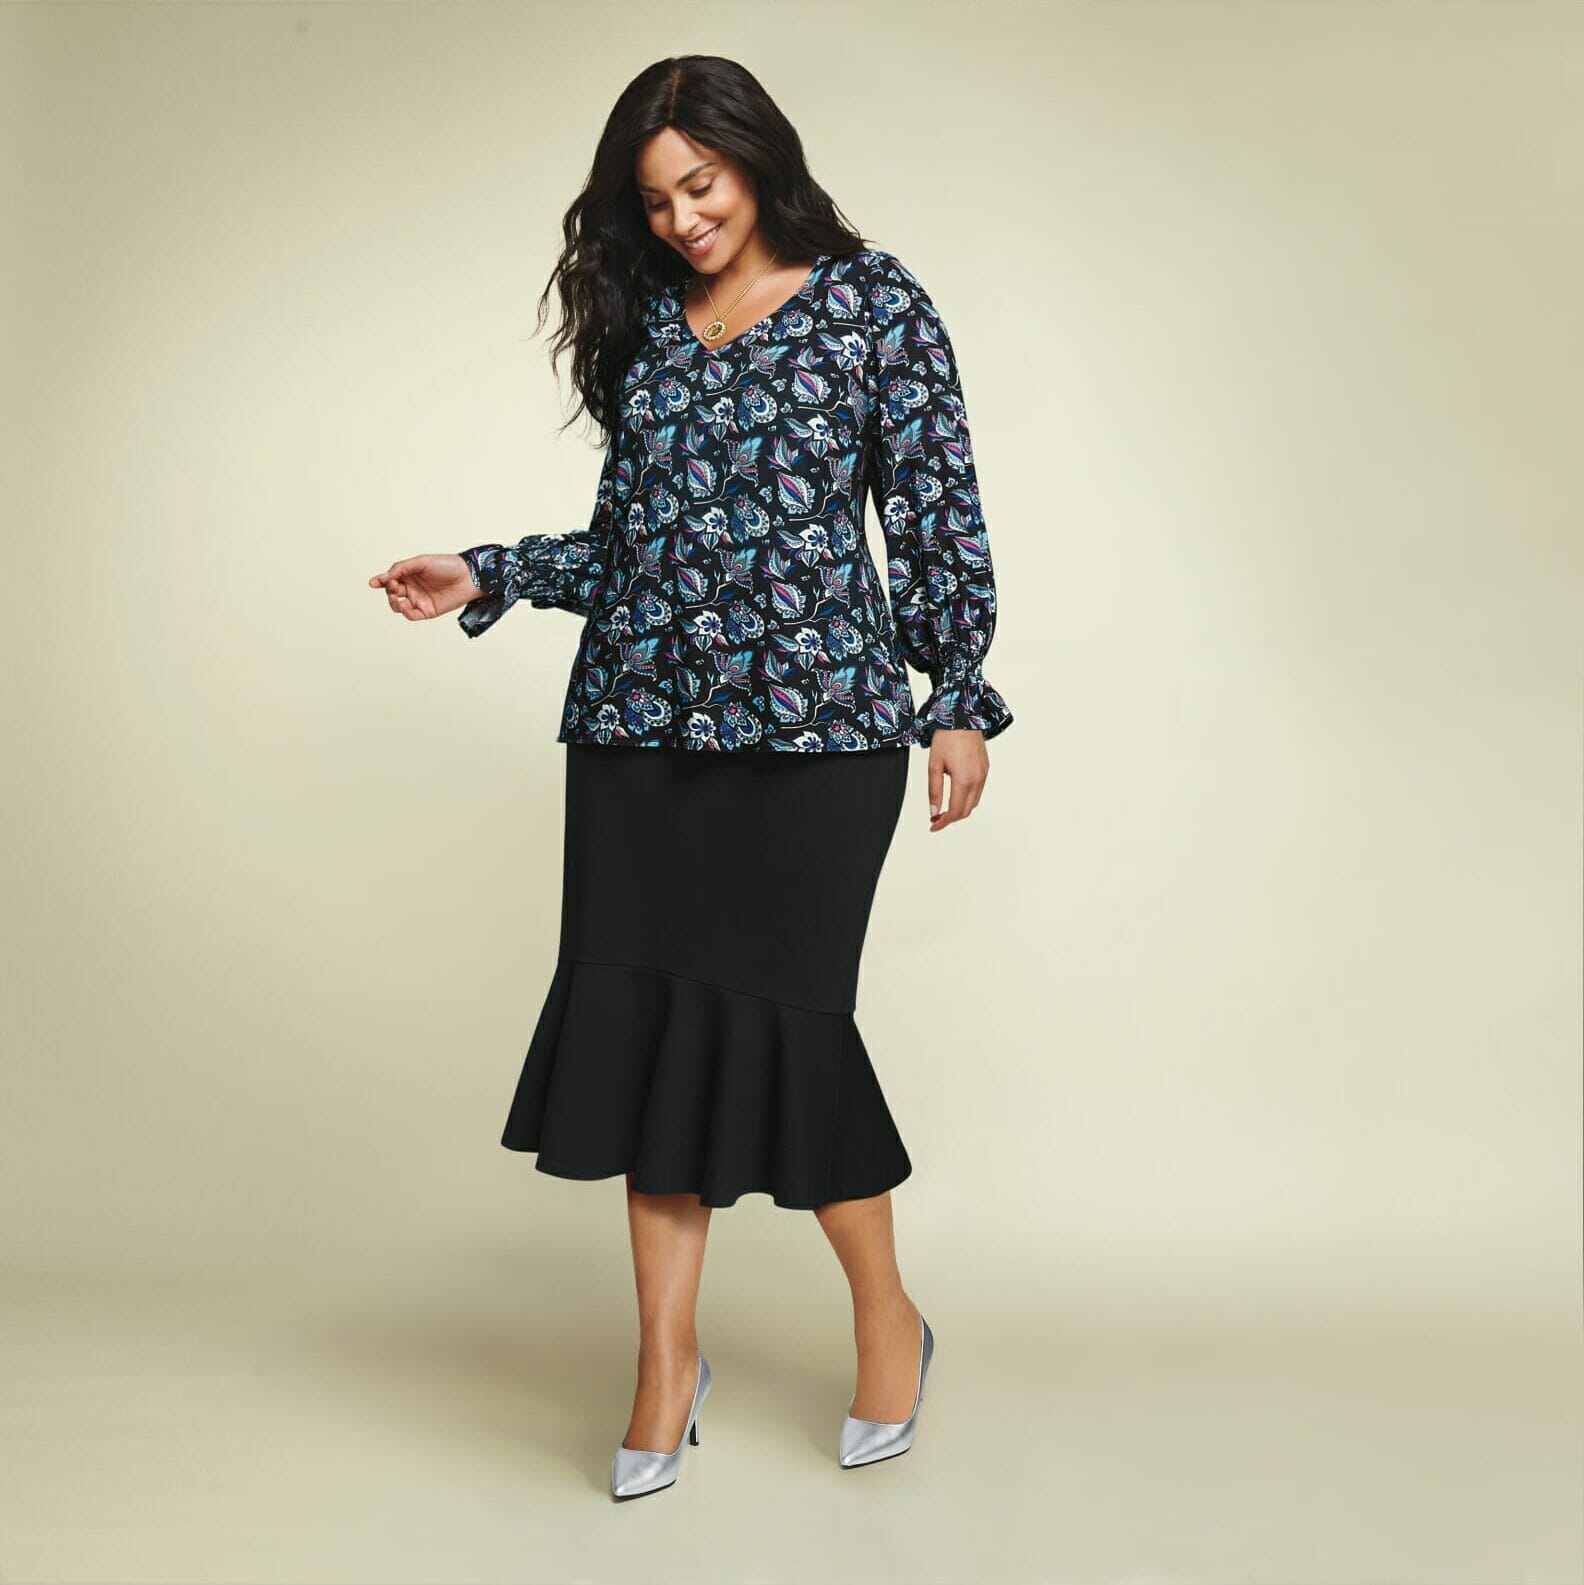 Plus size model wearing a long sleeve top with black skirt.